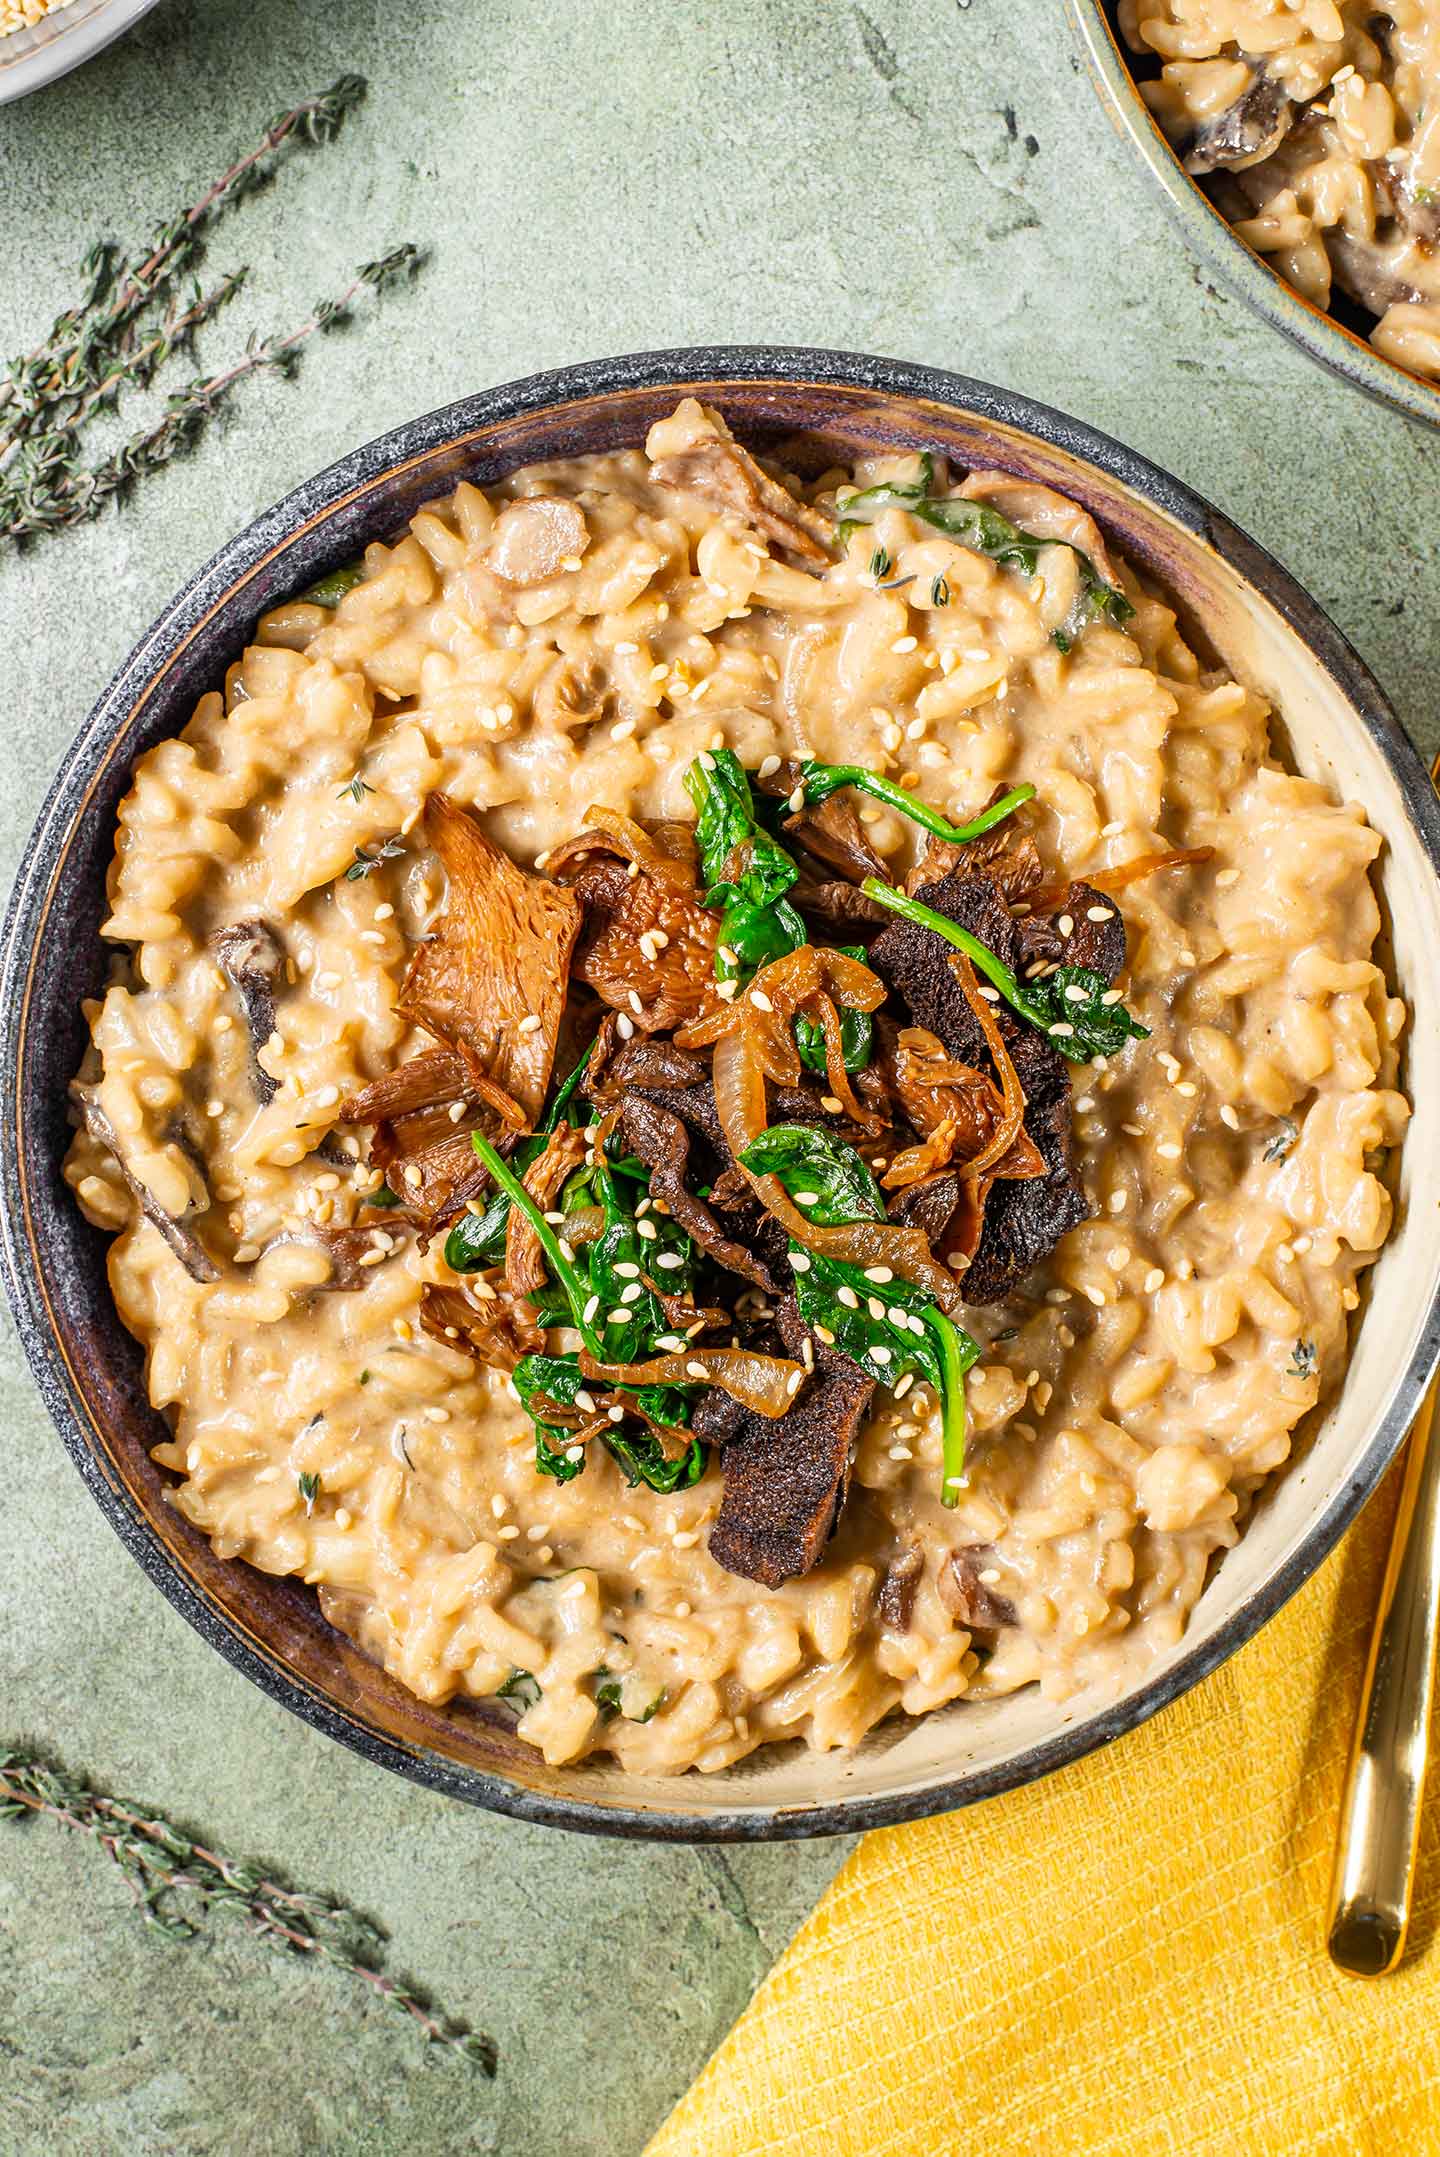 Top down view of creamy risotto in a dish topped with wild mushrooms, caramelized onion, and wilted spinach. Toasted sesame seeds and fresh thyme garnish.